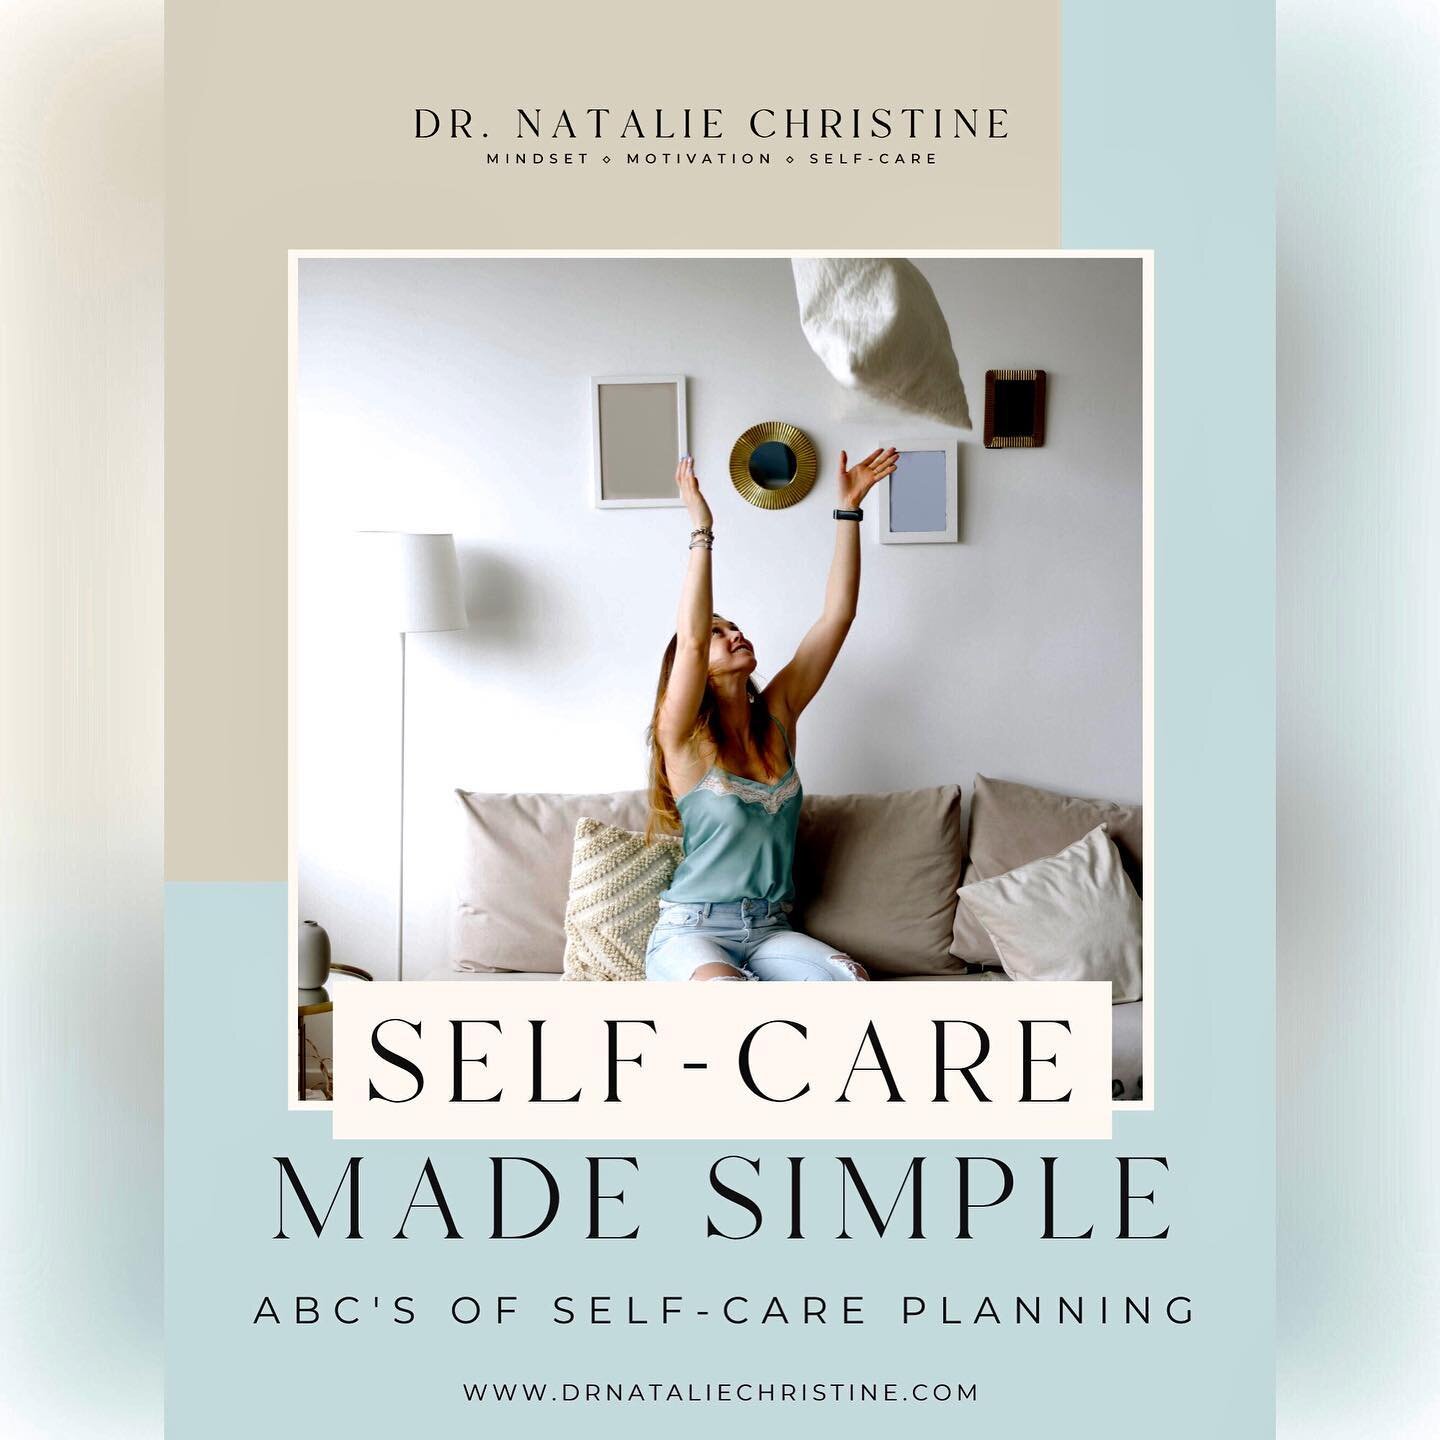 Hiyaa 👋🏽 If you haven&rsquo;t downloaded my FREE guide to self-care essentials, stop what you&rsquo;re doing, go to my website immediately(!) and get it 👀😘

You can start your self-care planning today by following these simple yet effective, scie